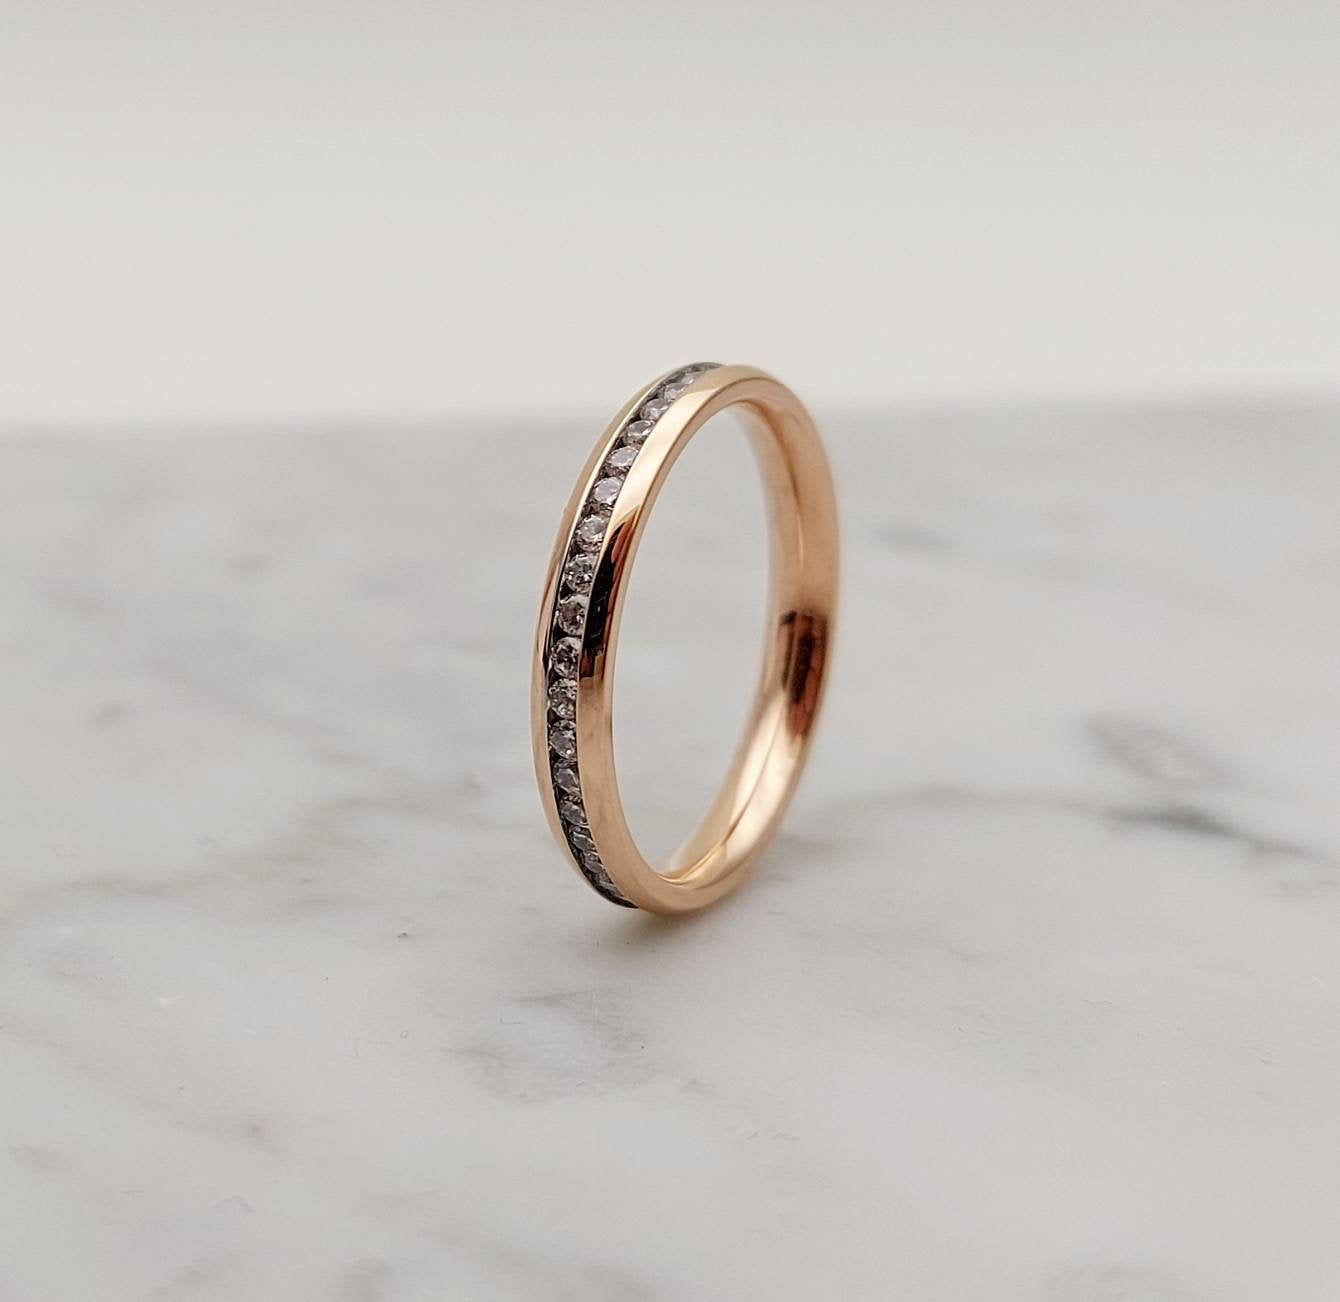 3mm Wide Man Made Diamond Simulant Full Eternity ring / stacking ring in rose gold filled - Wedding Band - Engagement ring